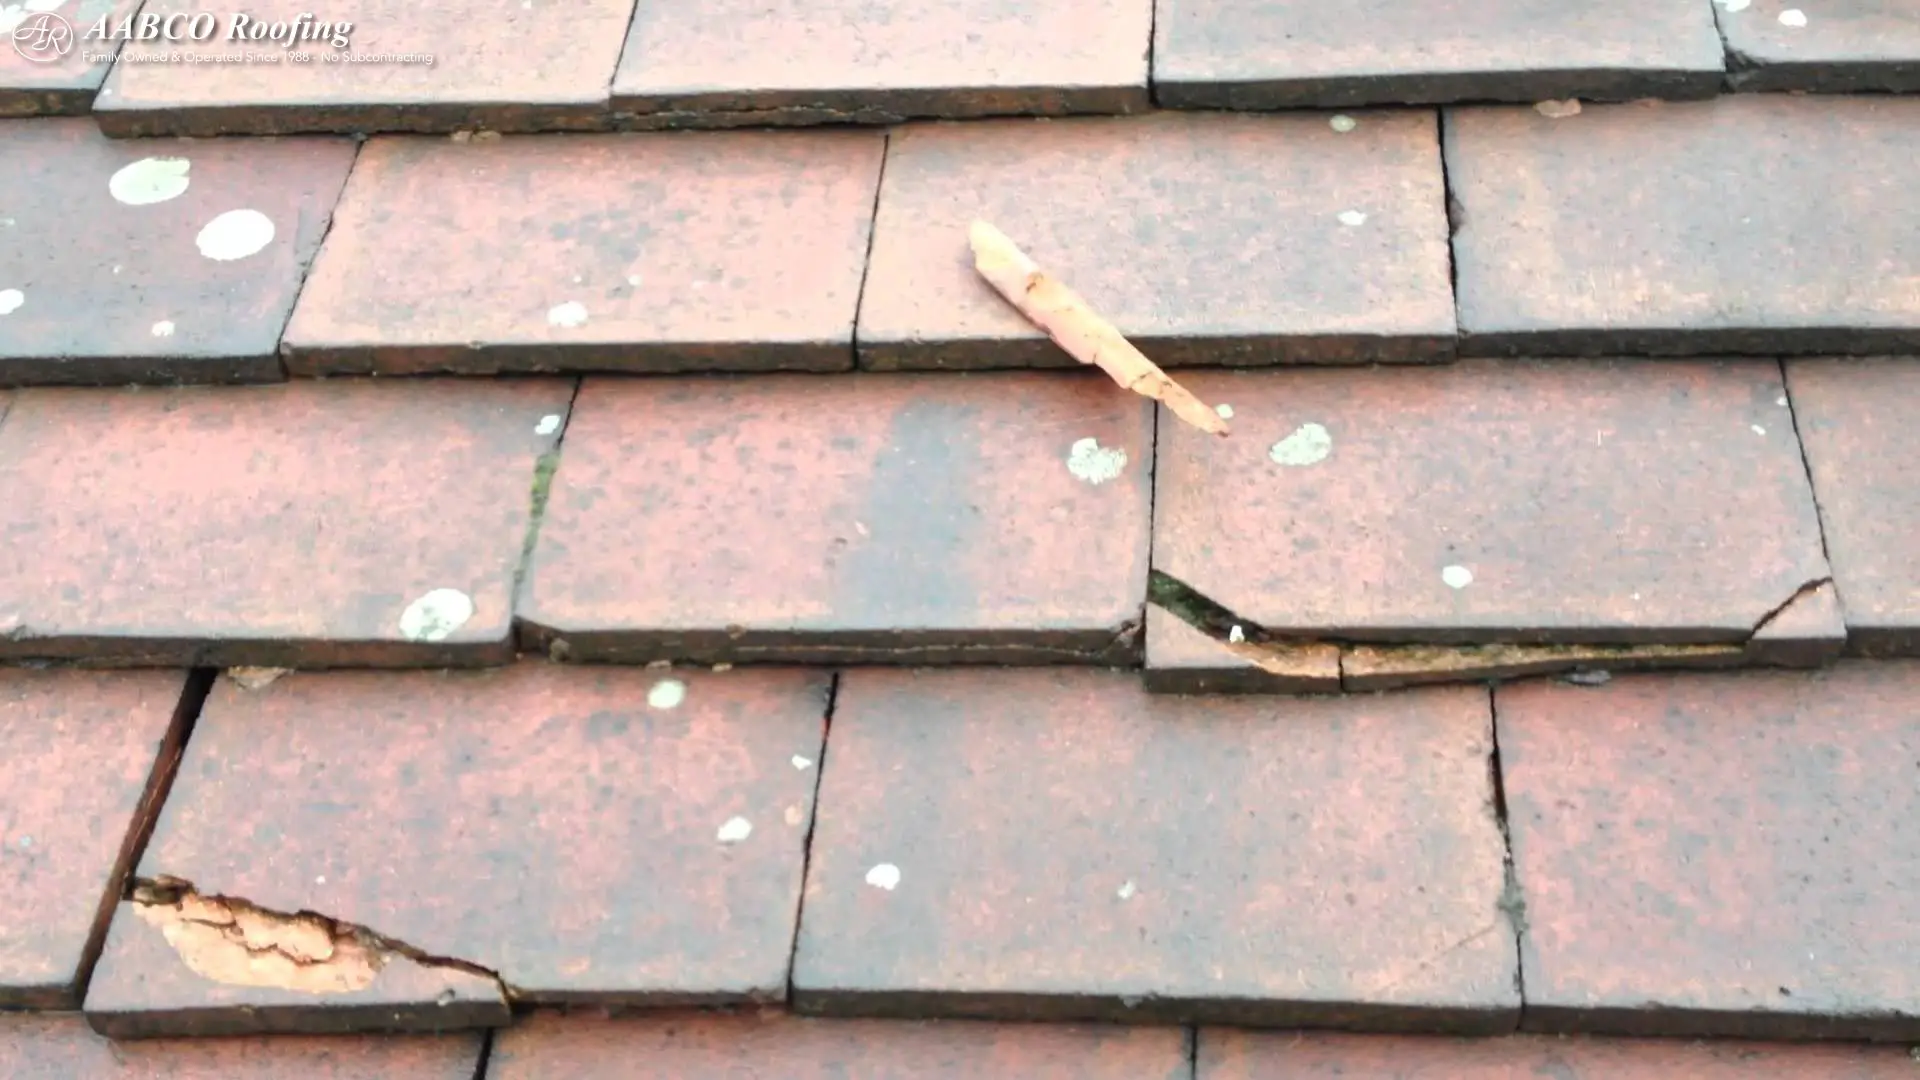 A Small Cracked Roof Tile and the Big Problems It Can Cause